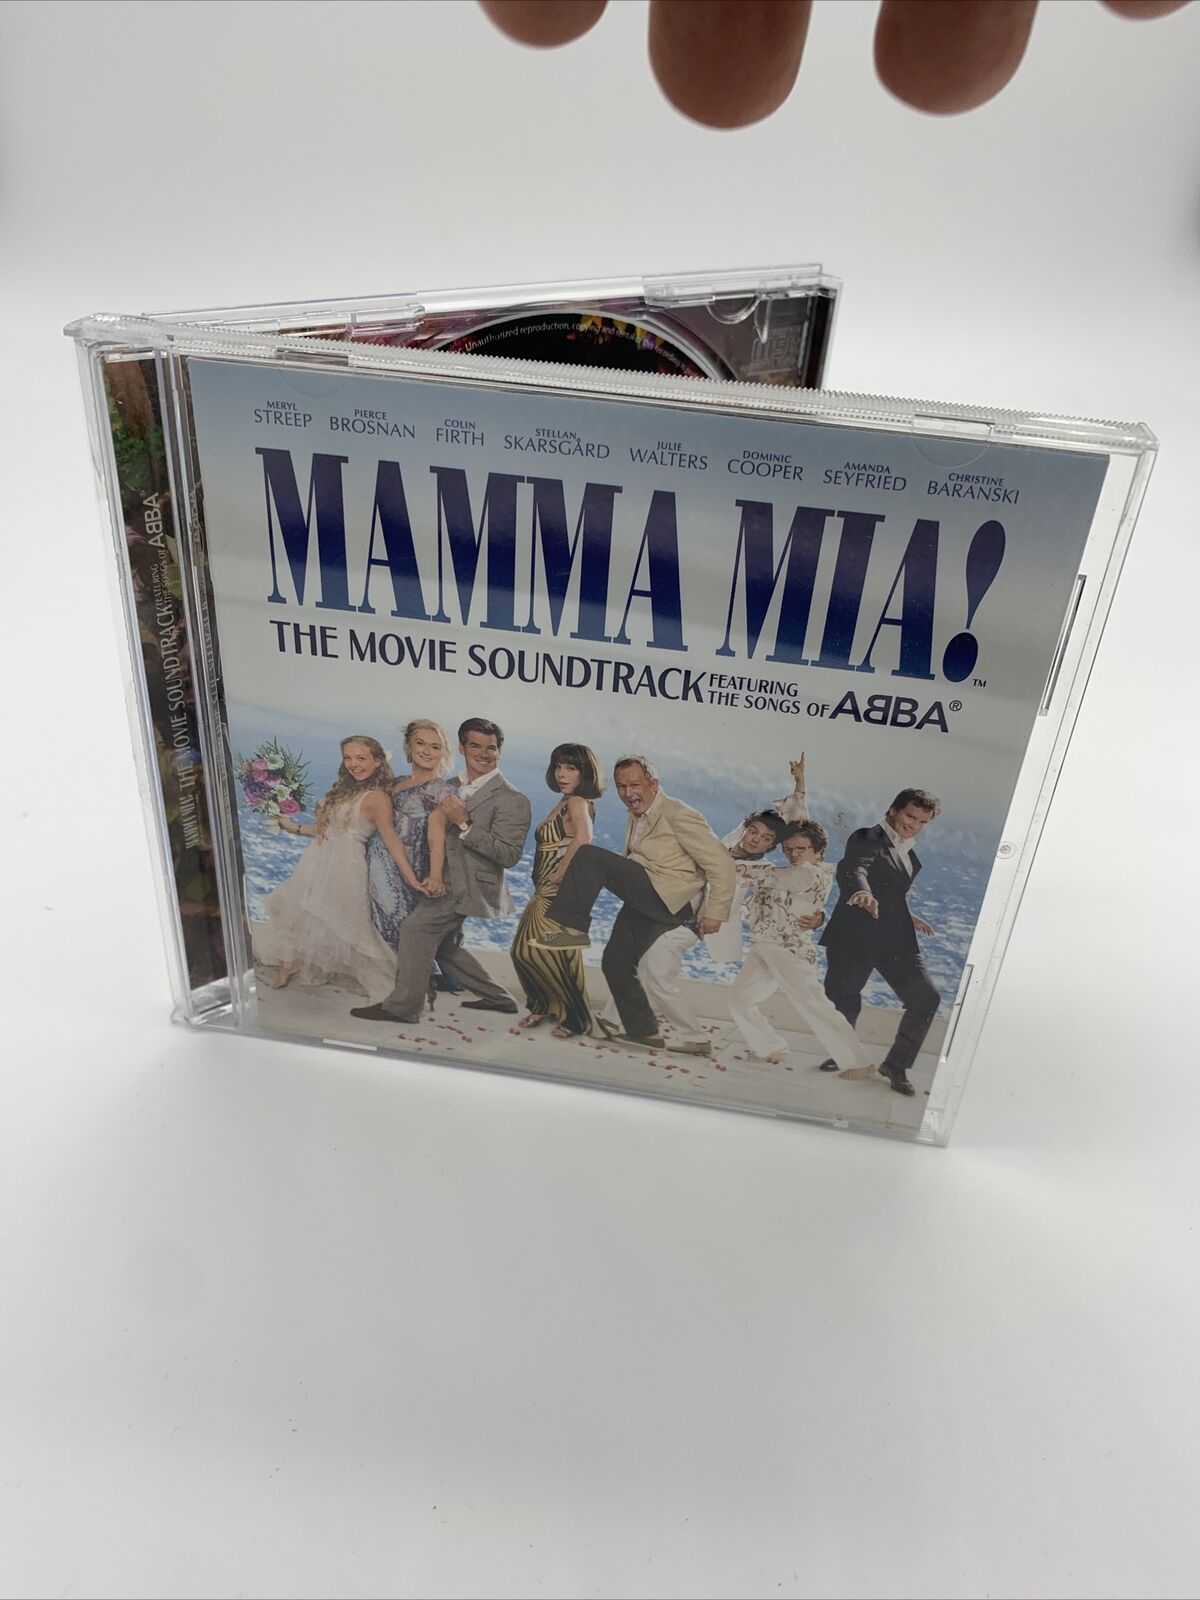 Mamma Mia! The Movie Soundtrack CD - Featuring Songs of ABBA 2008